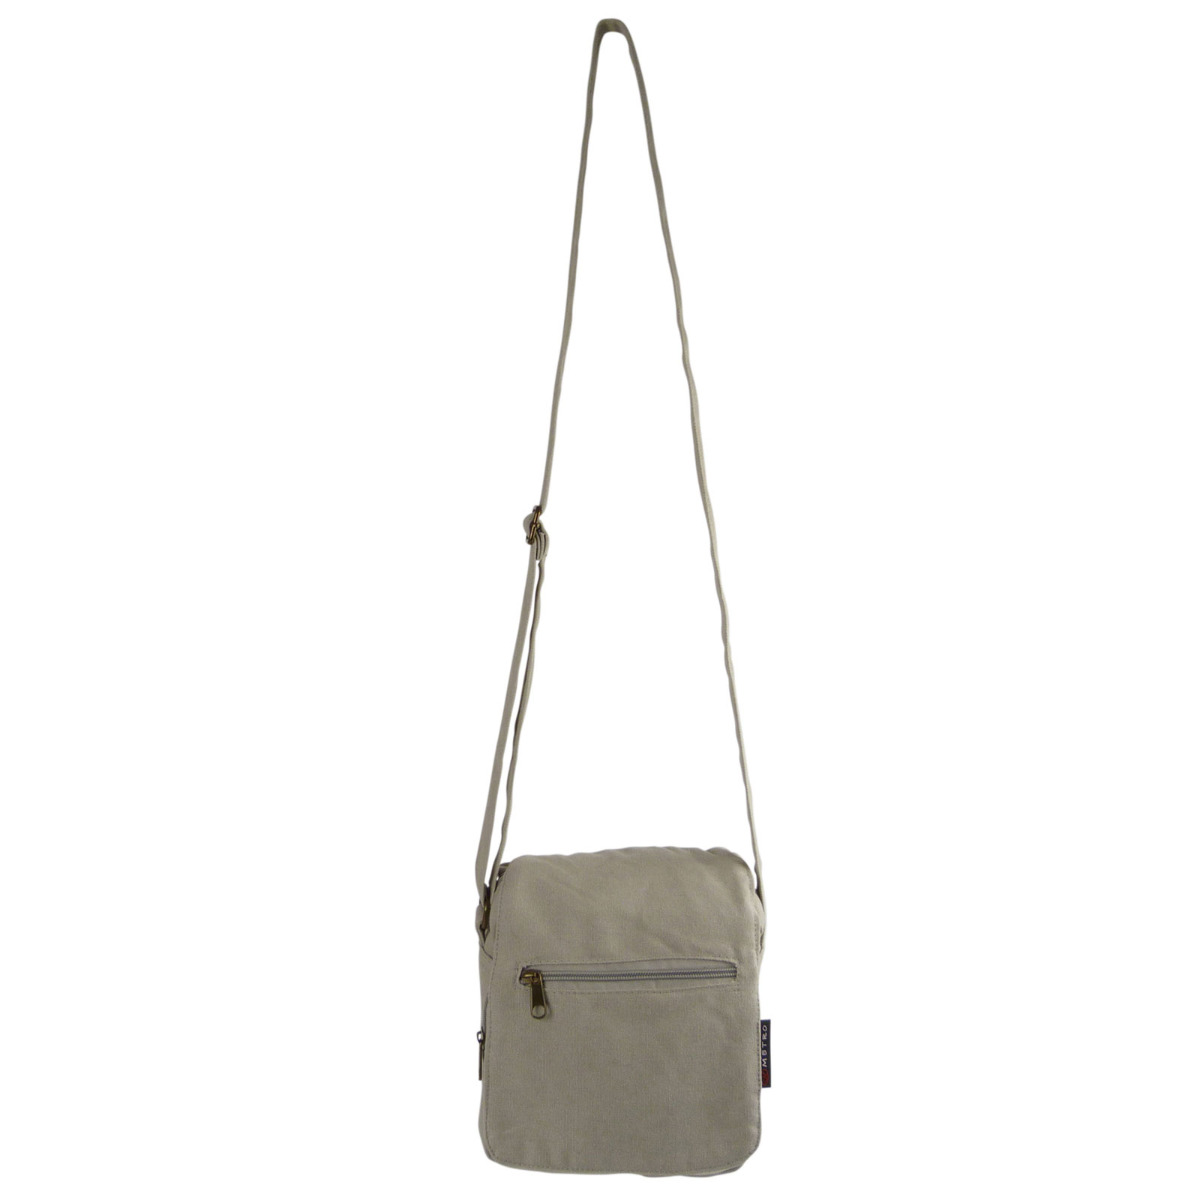 Washed Canvas Small Cotton Shoulder/Cross Body Bag Festival Travel | eBay